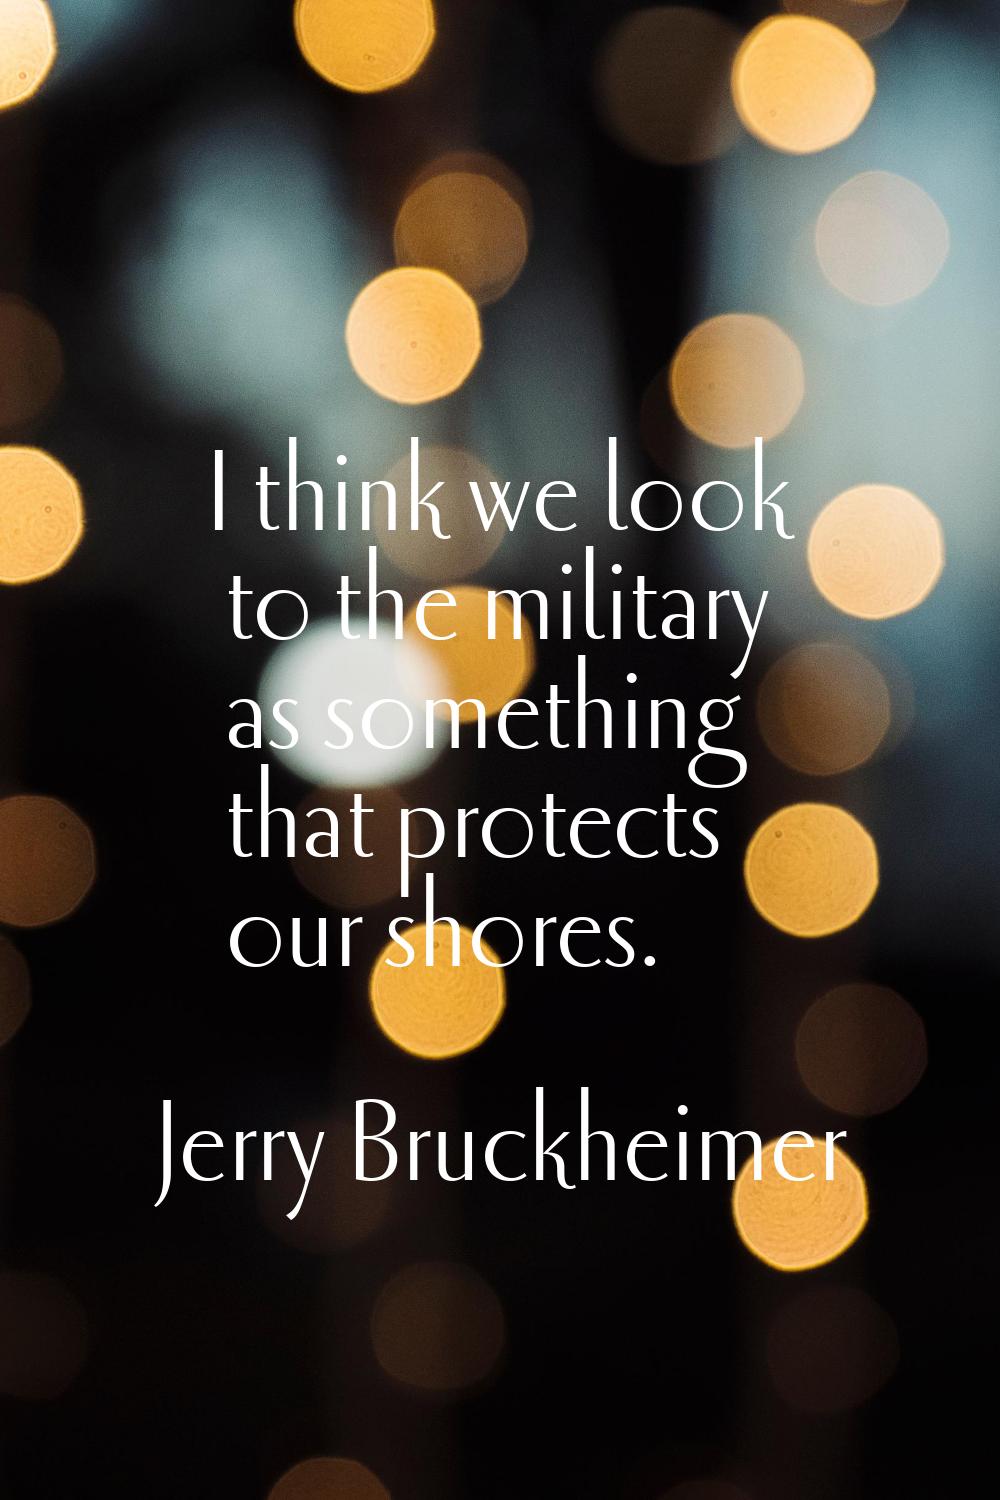 I think we look to the military as something that protects our shores.